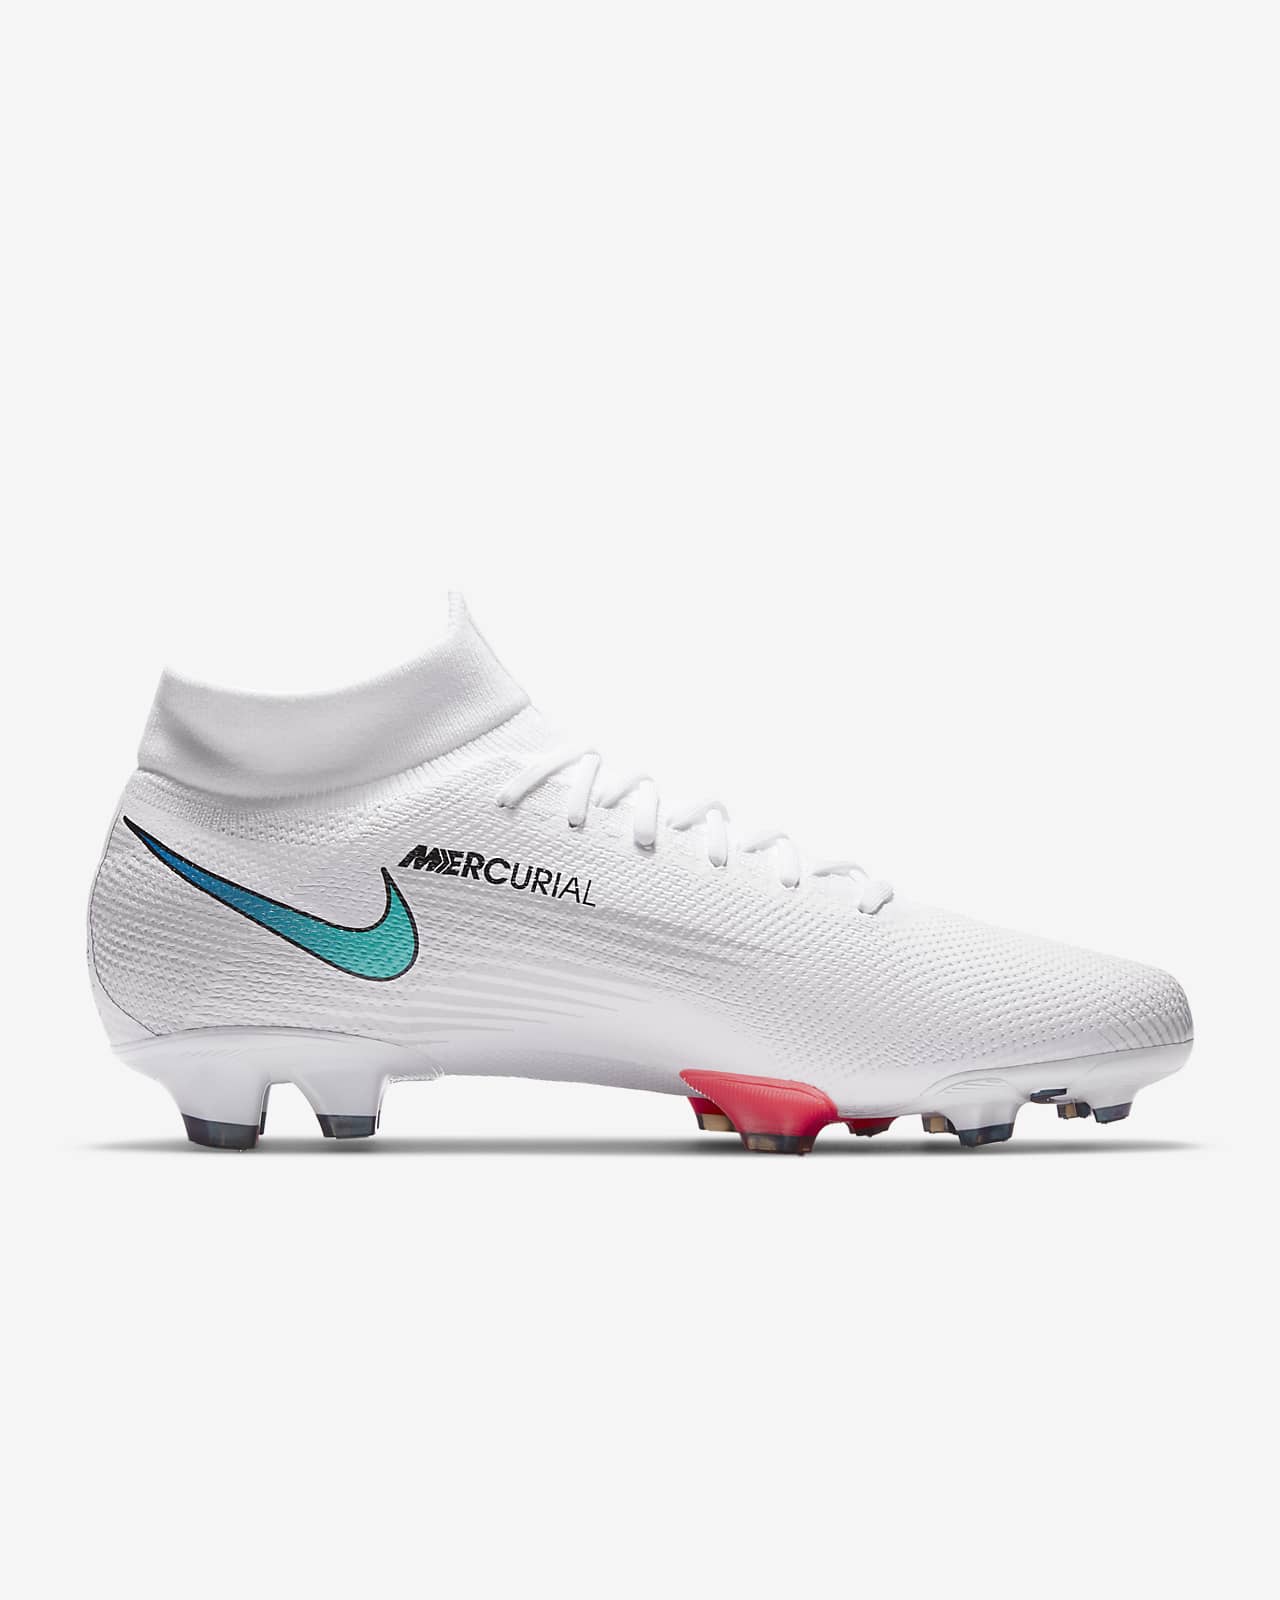 mercurial boots price in south africa